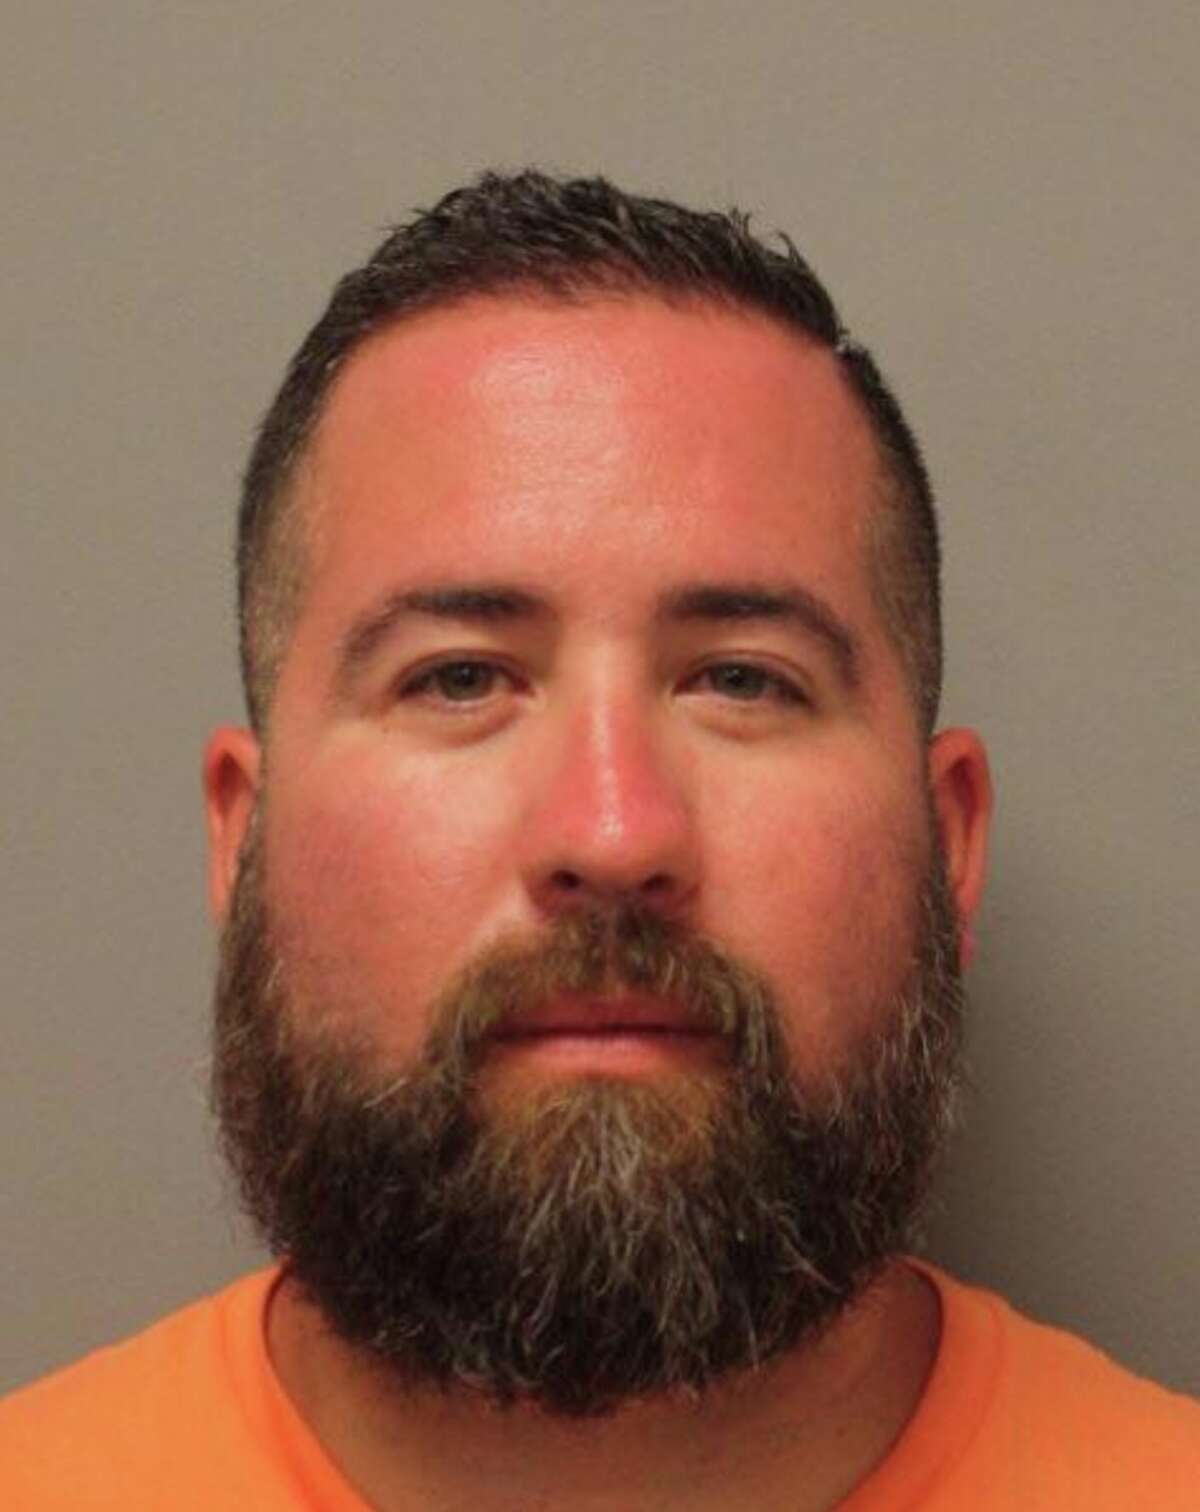 James Bramlet, 37, was charged with misdemeanor DWI and unlawful carry of a weapon after allegedly crashing into a Harris County Precinct 8 Constable's Office deputy on Saturday, April 20, 2019.